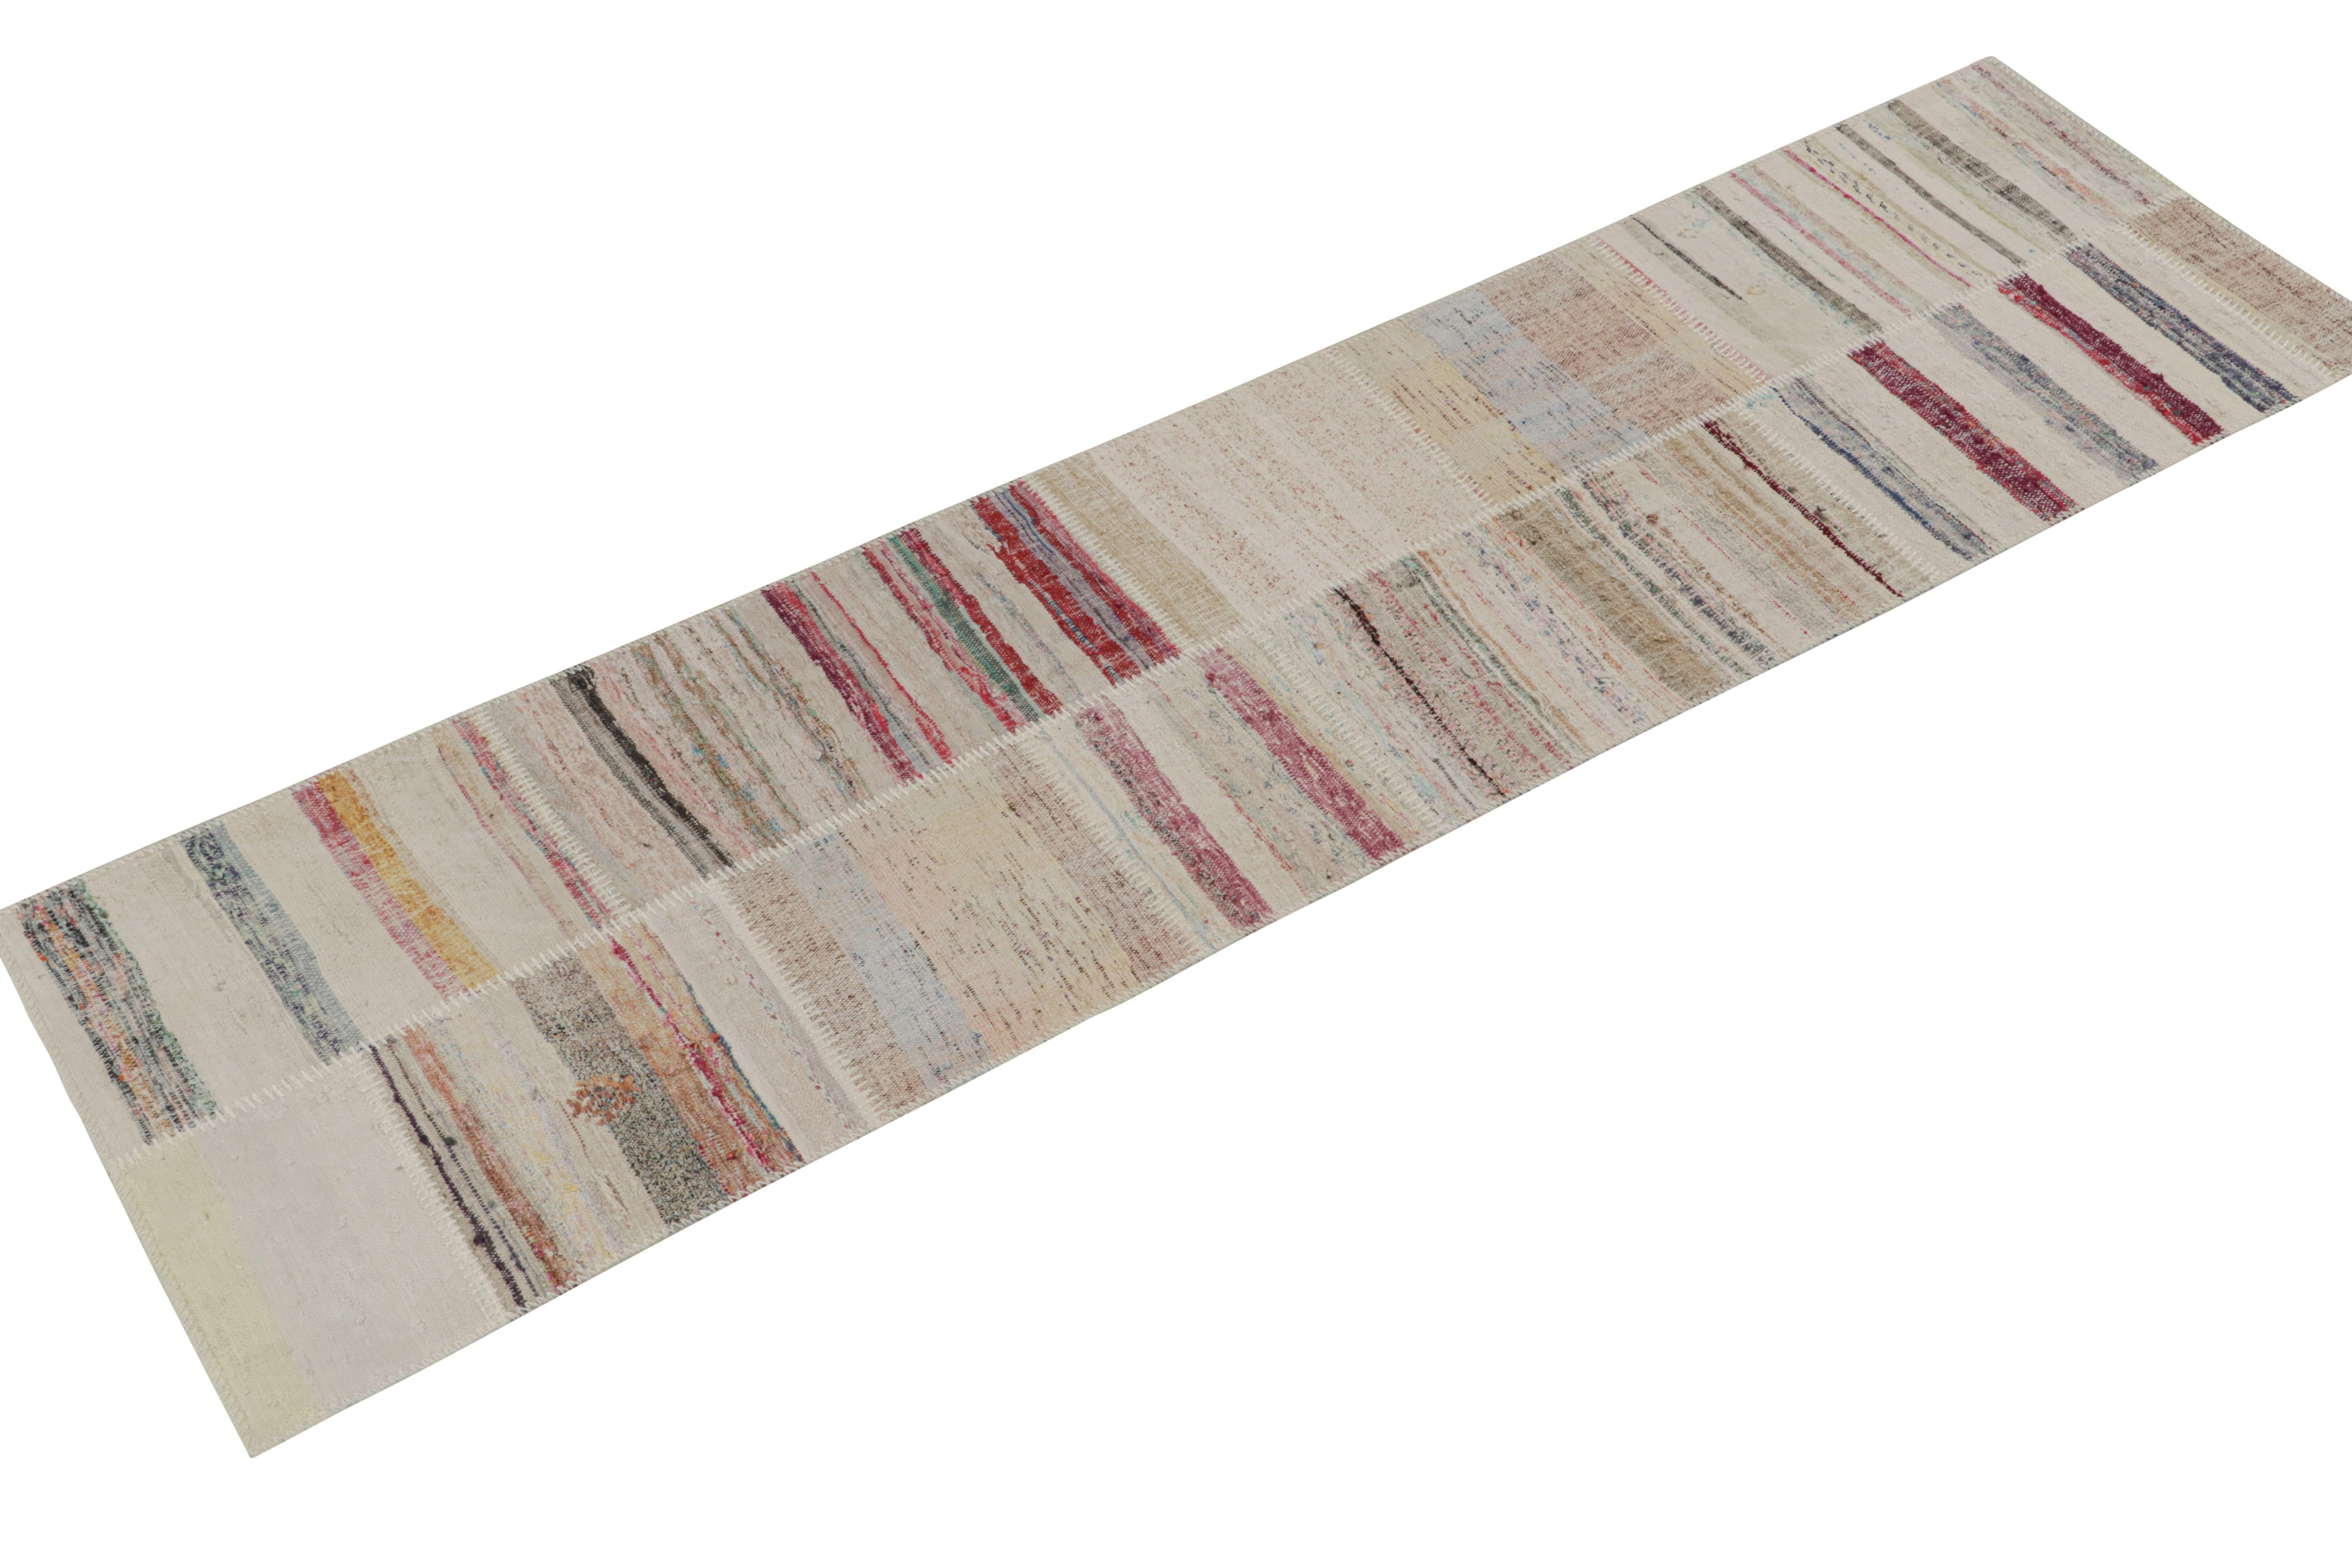 Rug & Kilim presents a contemporary 3x10 runner from their innovative new patchwork kilim collection. 

On the Design: 

This flat weave technique repurposes vintage yarns in polychromatic stripes and striae, achieving a playful look with